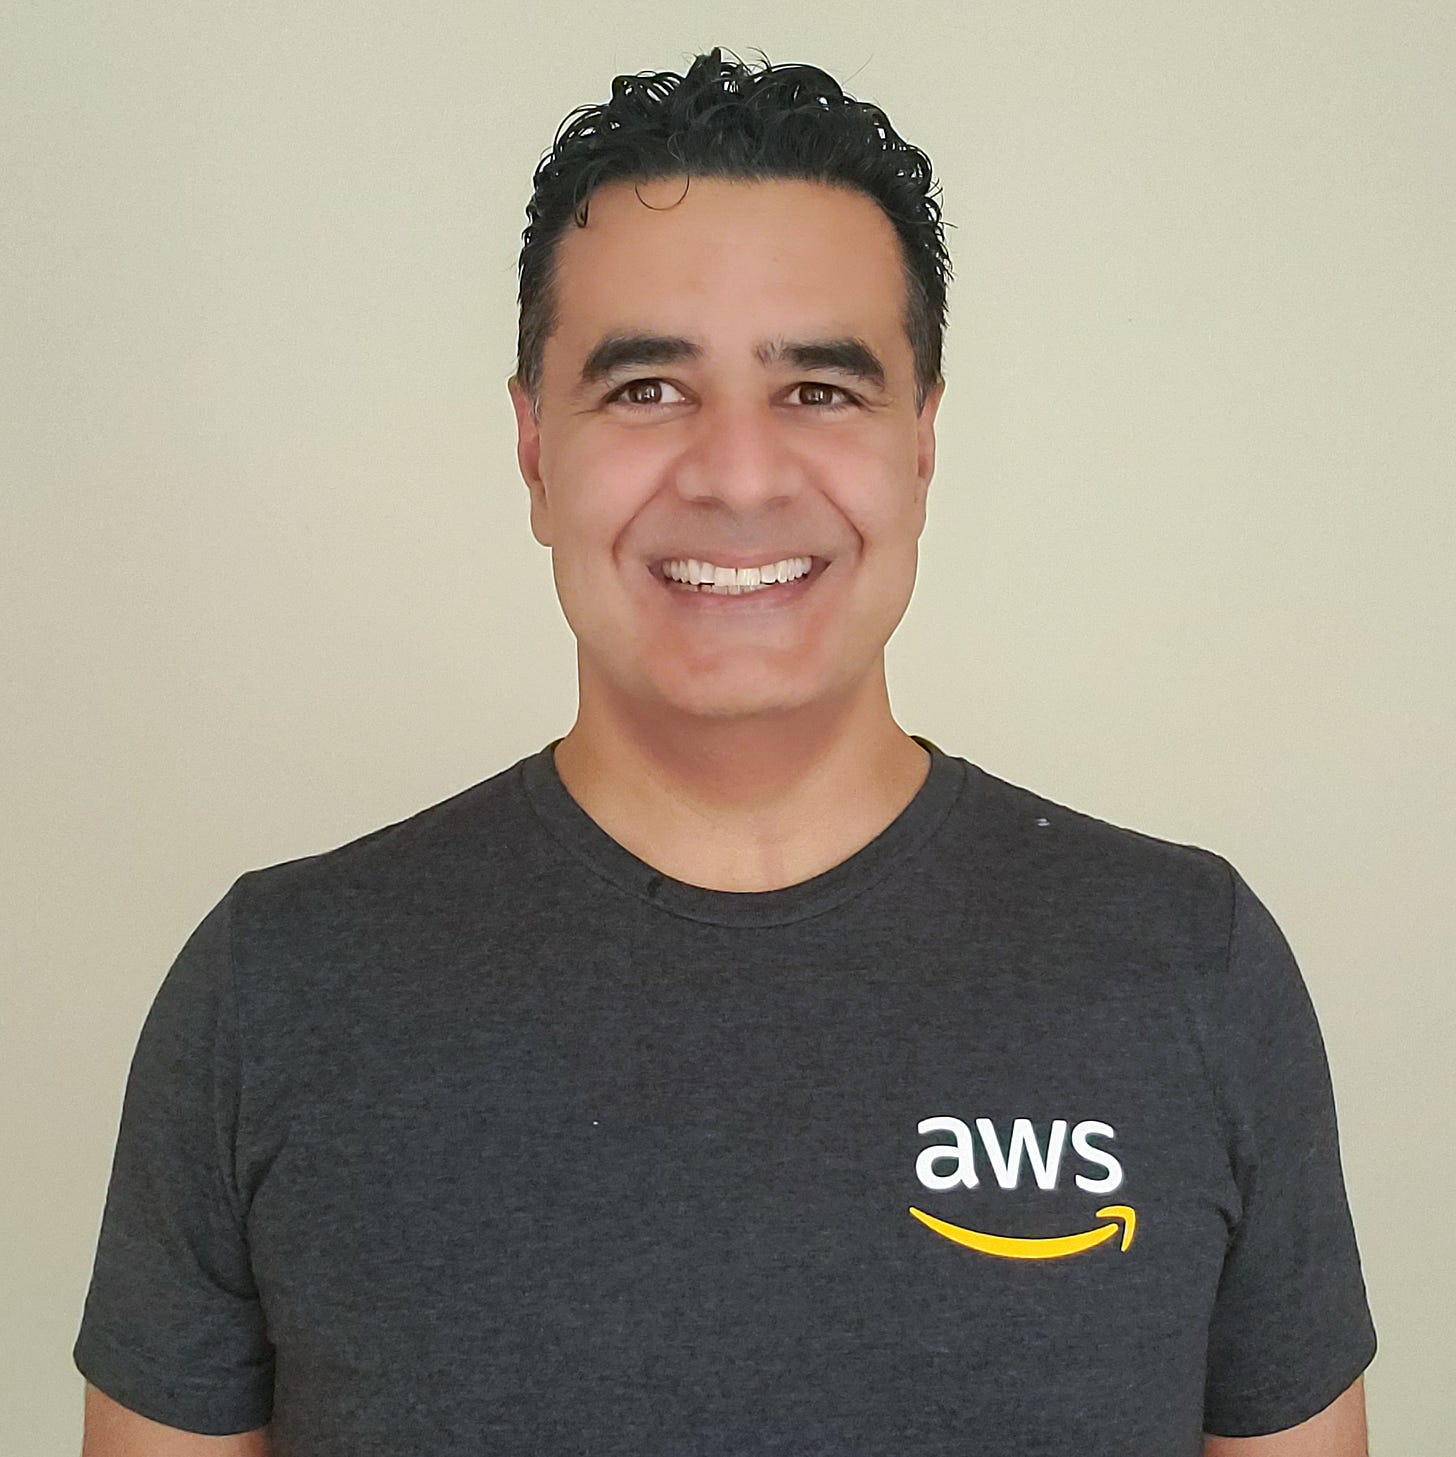 Yes, I joined Amazon Web Services and I grin like an idiot…